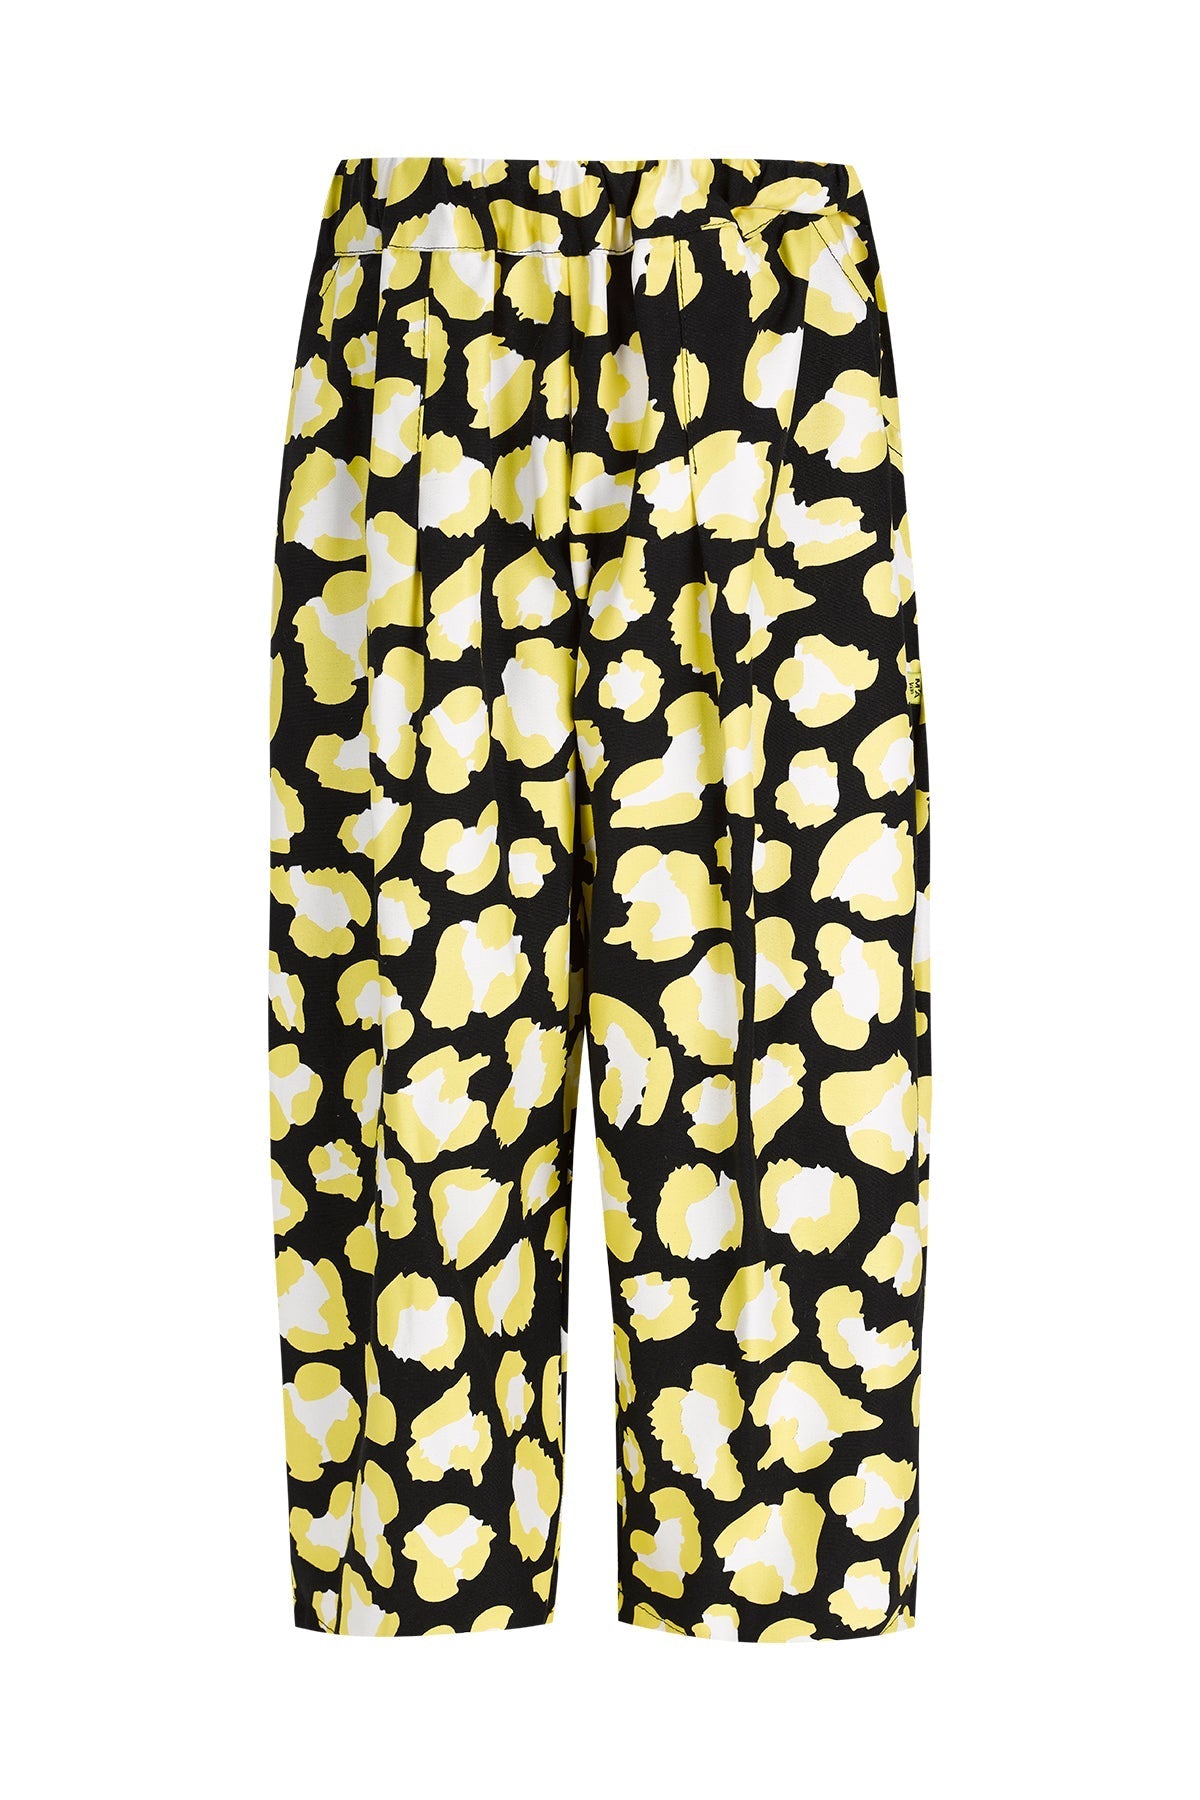 YELLOW AND BLACK LEOPARD PRINTED LOOSE TROUSERS MA KIDS